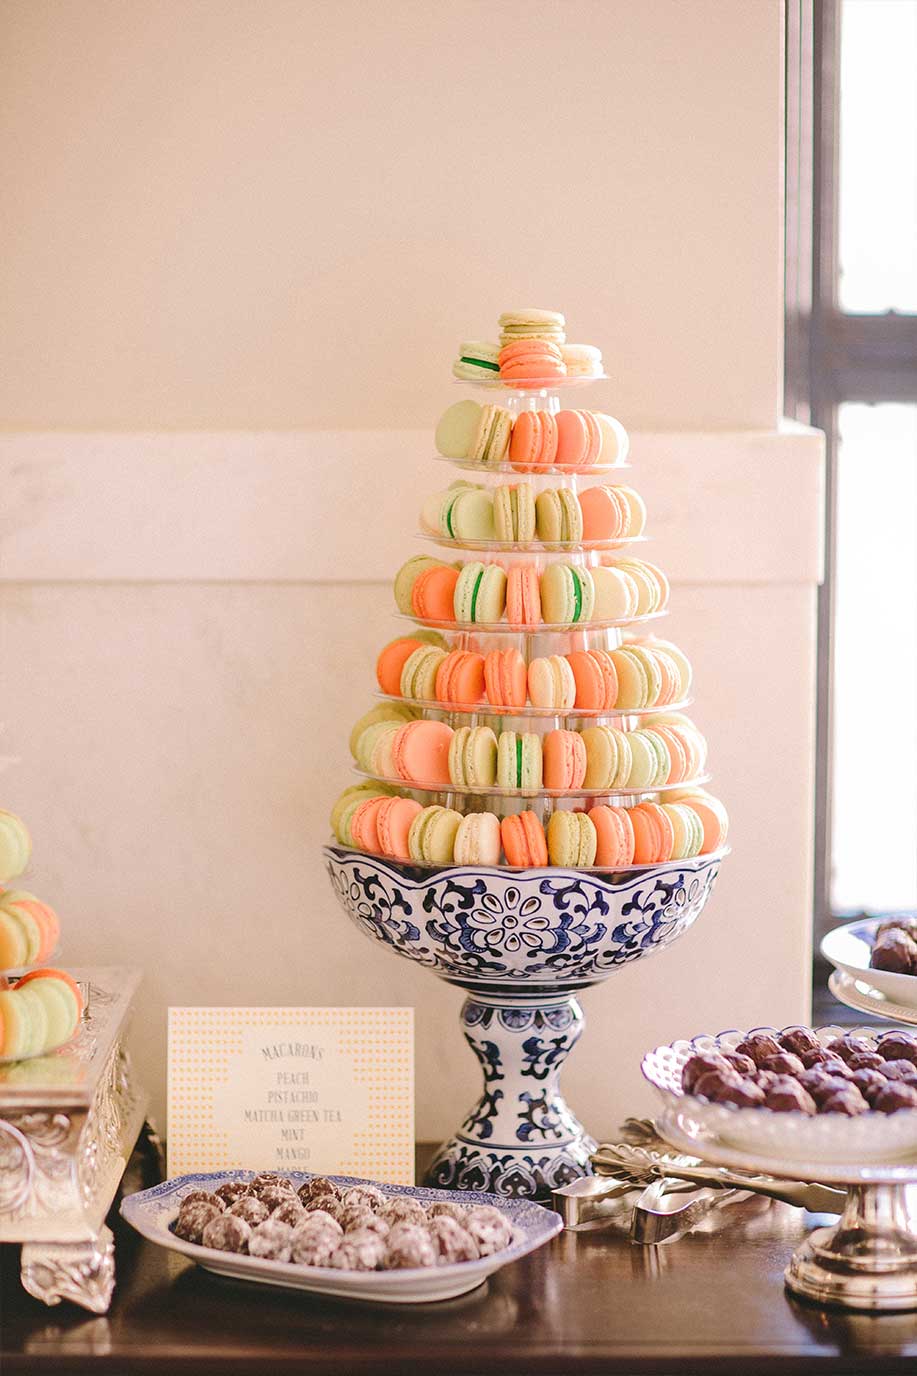 Wedding dessert table with macaroons and chocolate truffles on blue and white porcelain